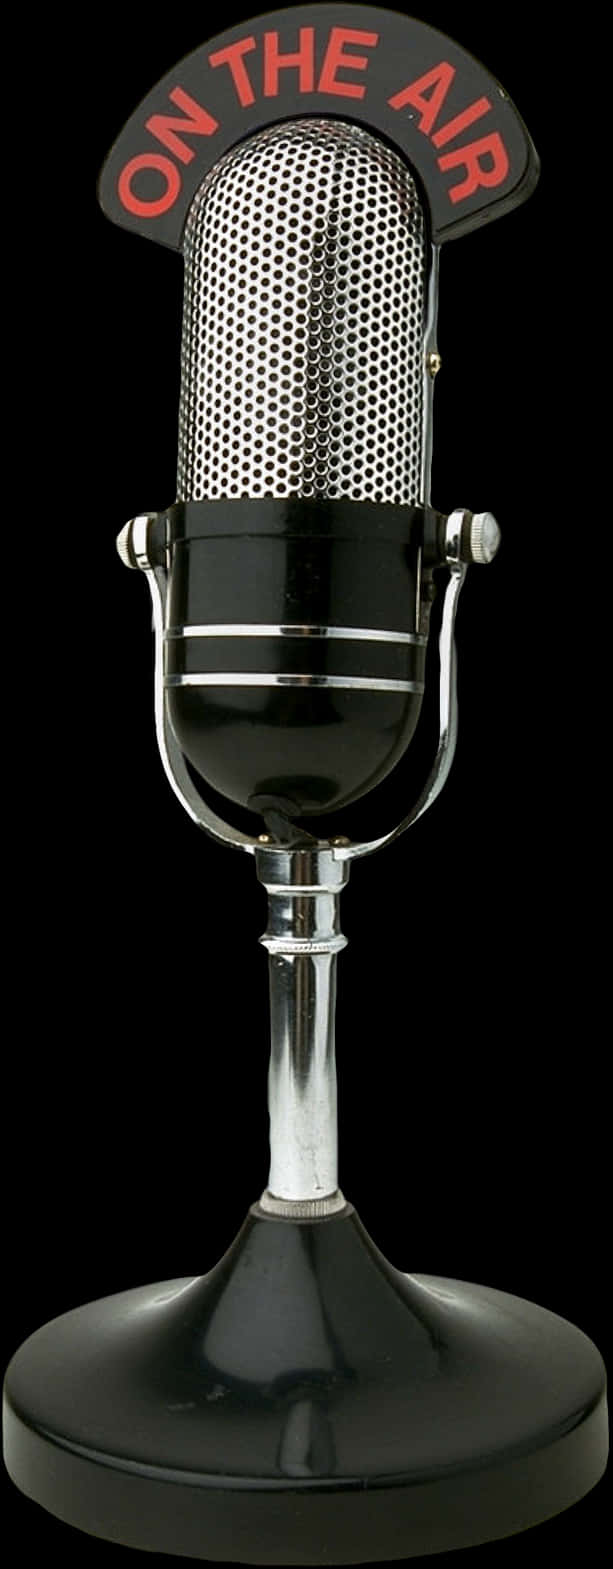 Vintage On The Air Microphone PNG image